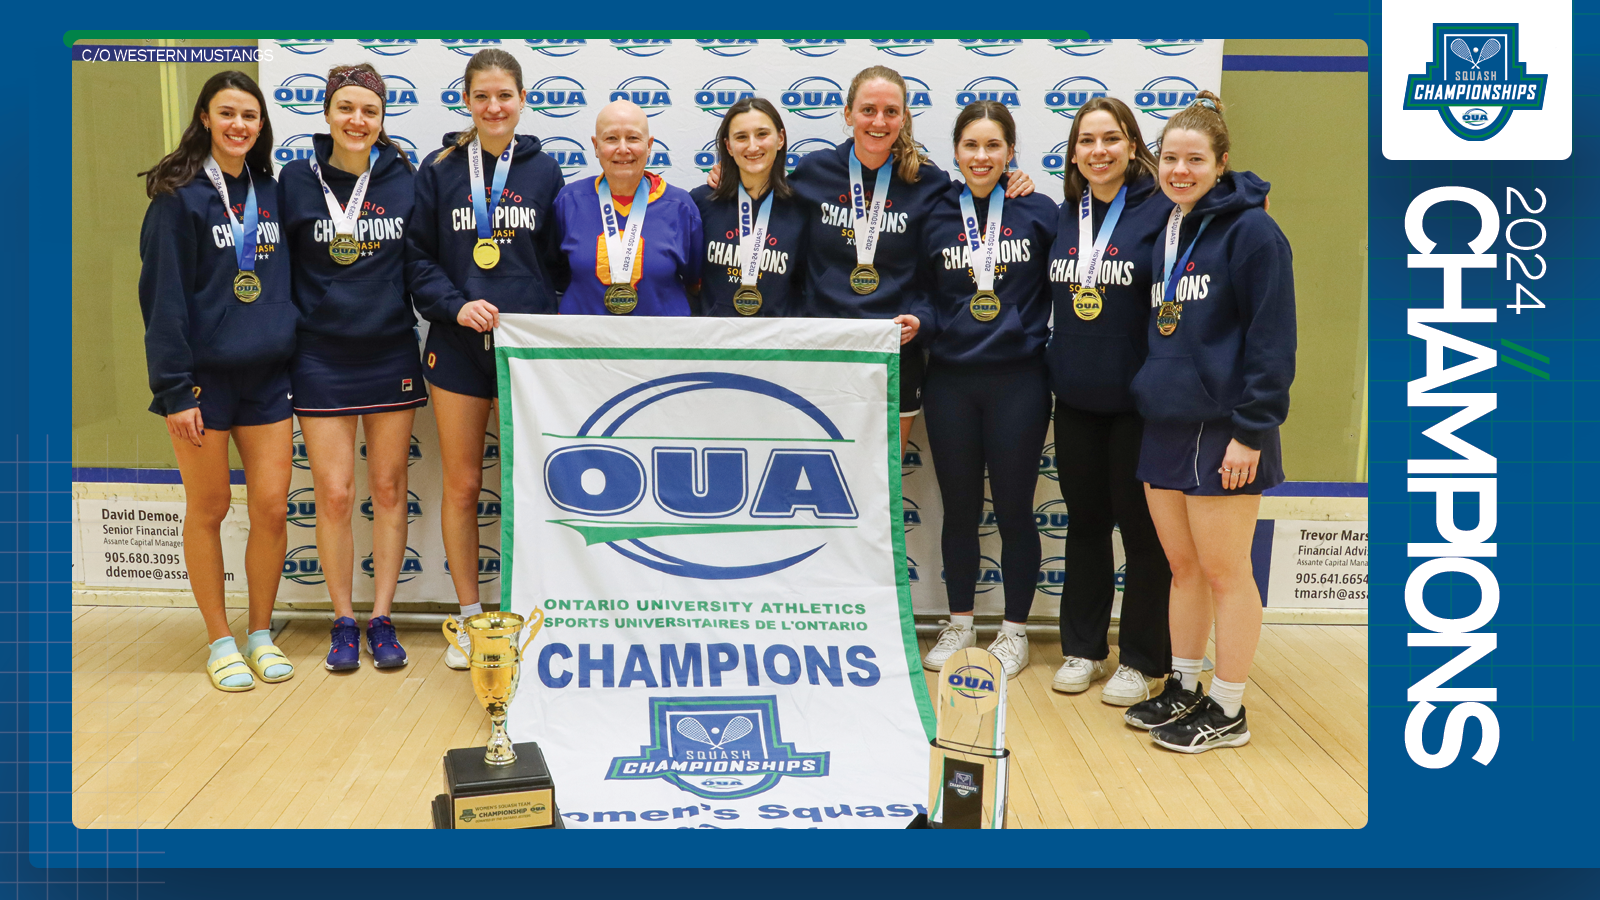 Predominantly blue graphic covered mostly by 2024 OUA Women's Squash Championship banner photo, with the corresponding championship logo and white text reading '2024 Champions' on the right side